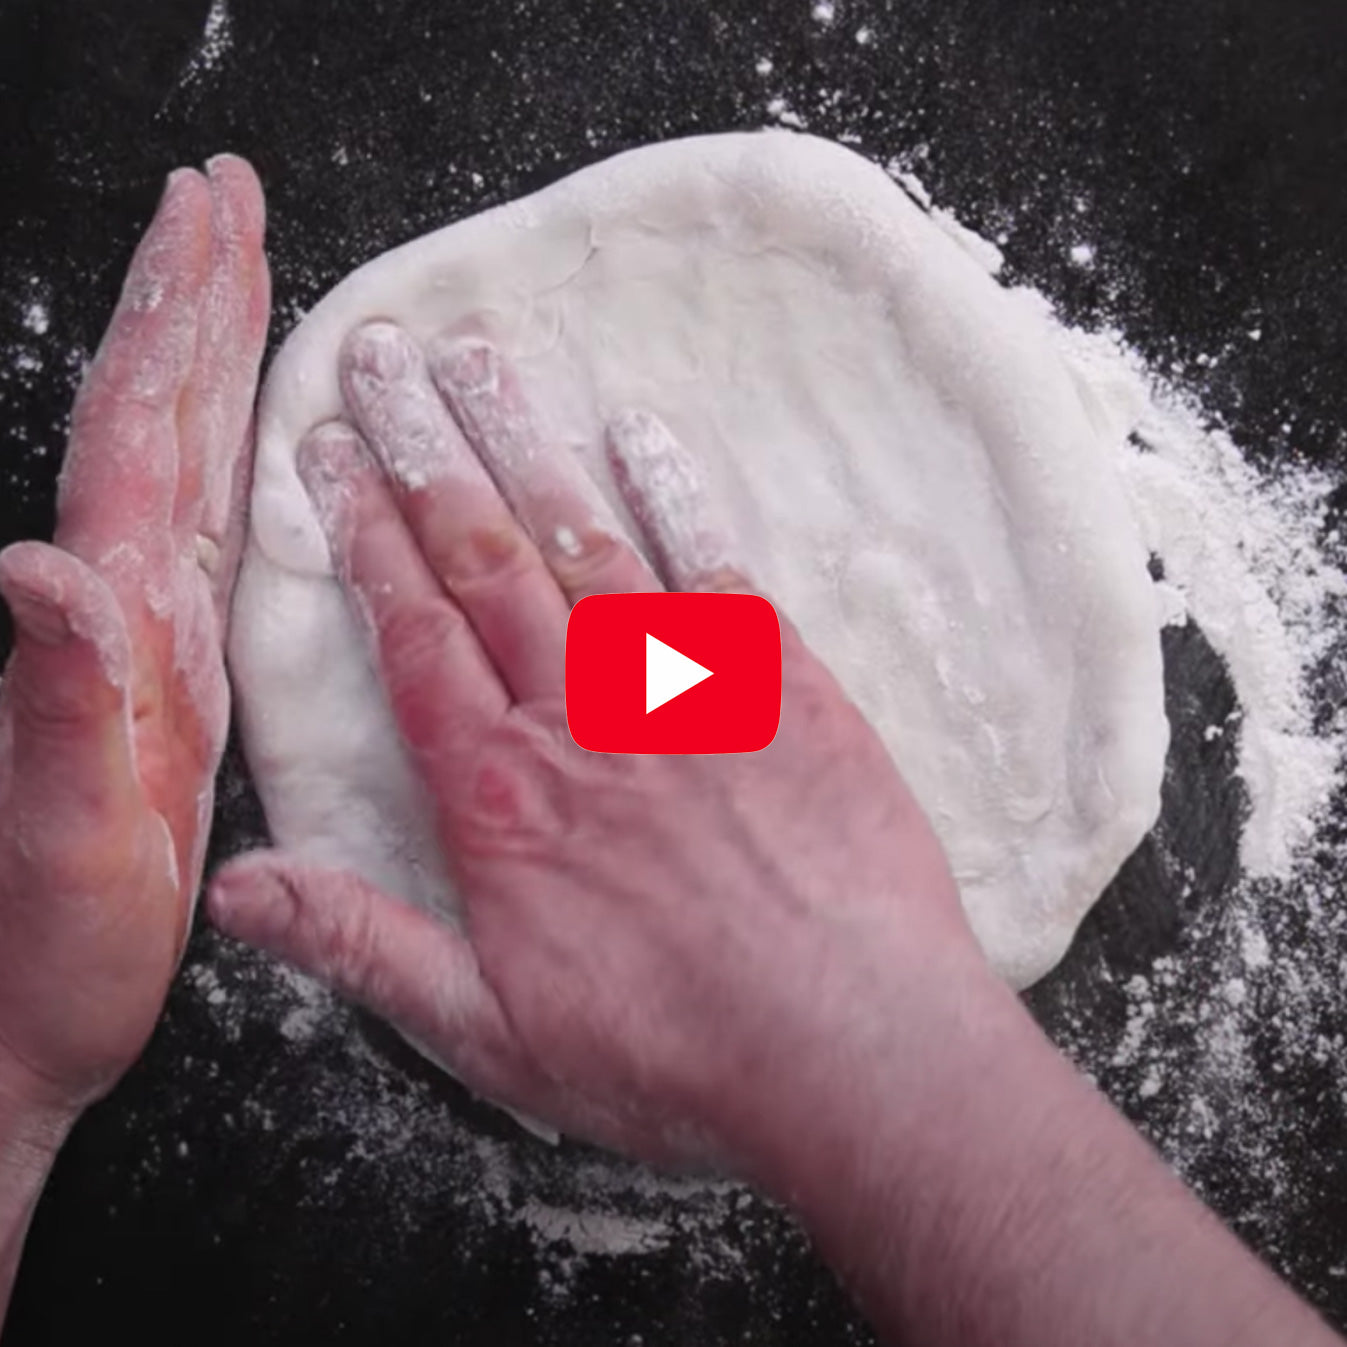 How To Make Simple Pizza Dough Tutorial (Video) - Gozney